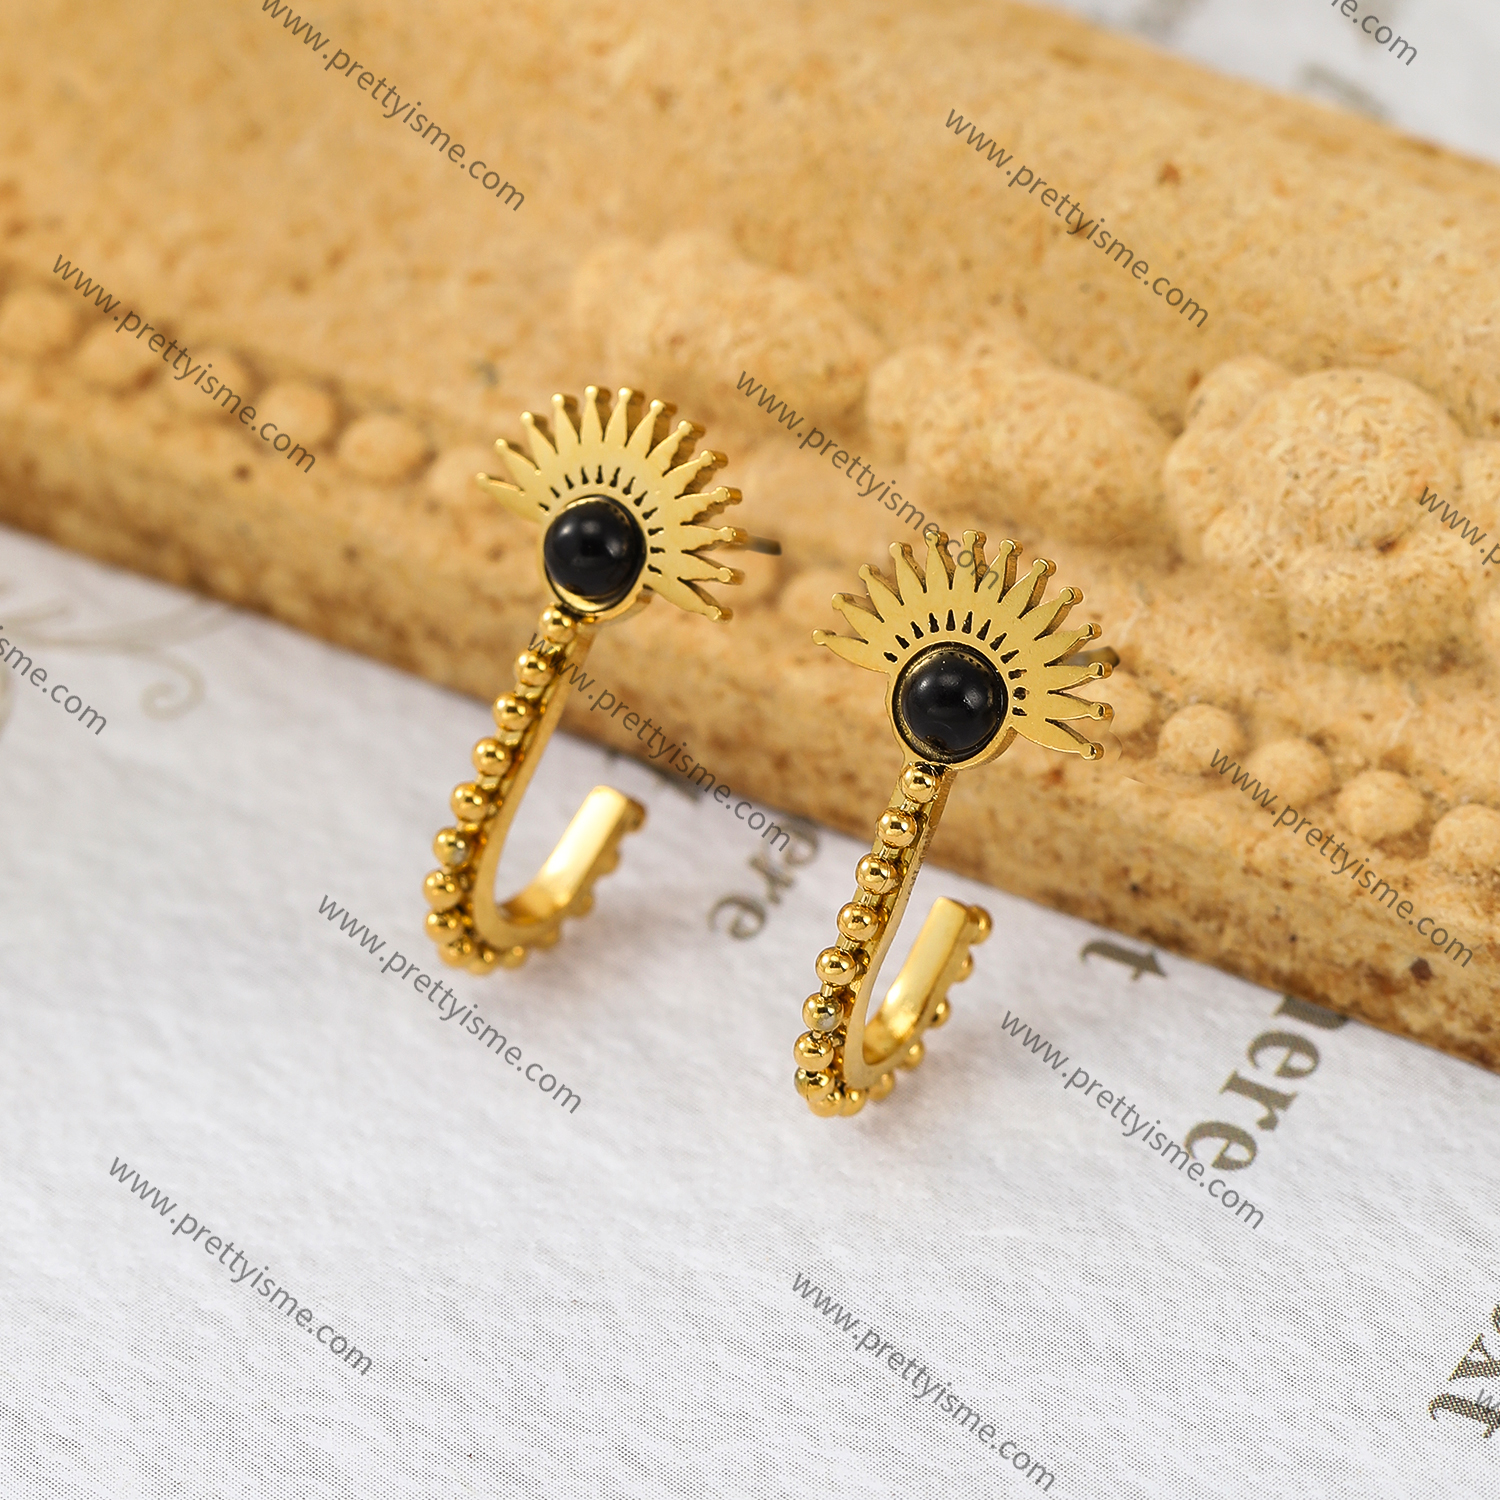 Stainless Steel Earrings Unique Shape 18K Gold Plated Waterproof with Gold Beads.webp